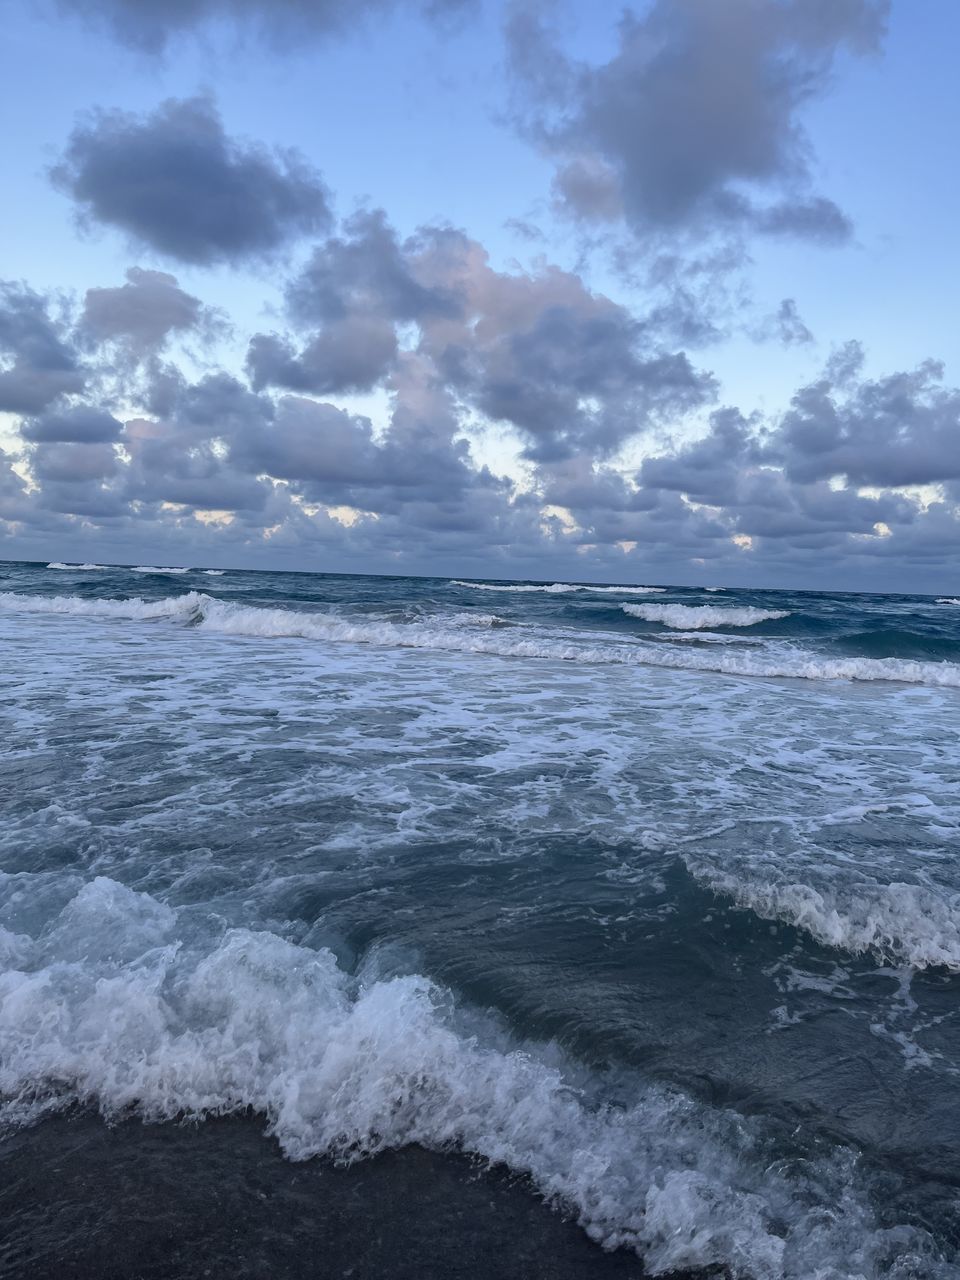 water, wave, wind wave, sea, beauty in nature, motion, nature, cloud, scenics - nature, ocean, sky, water sports, no people, outdoors, day, sports, environment, land, freezing, power in nature, blue